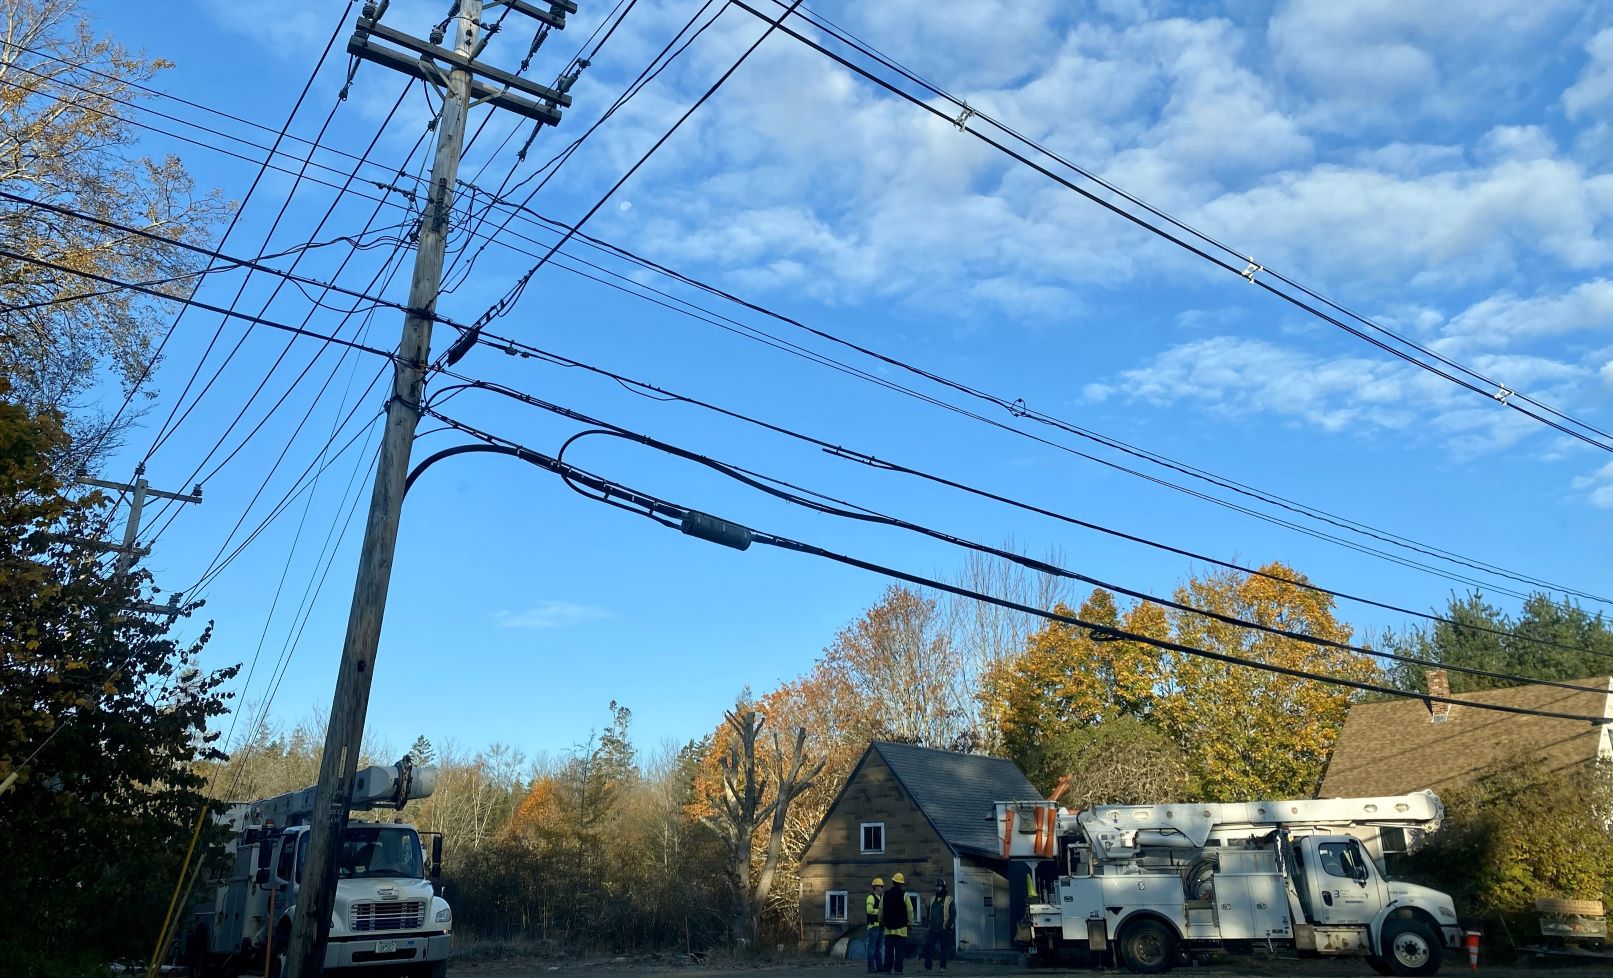 Power trucks are seen parked underneath electric lines. 